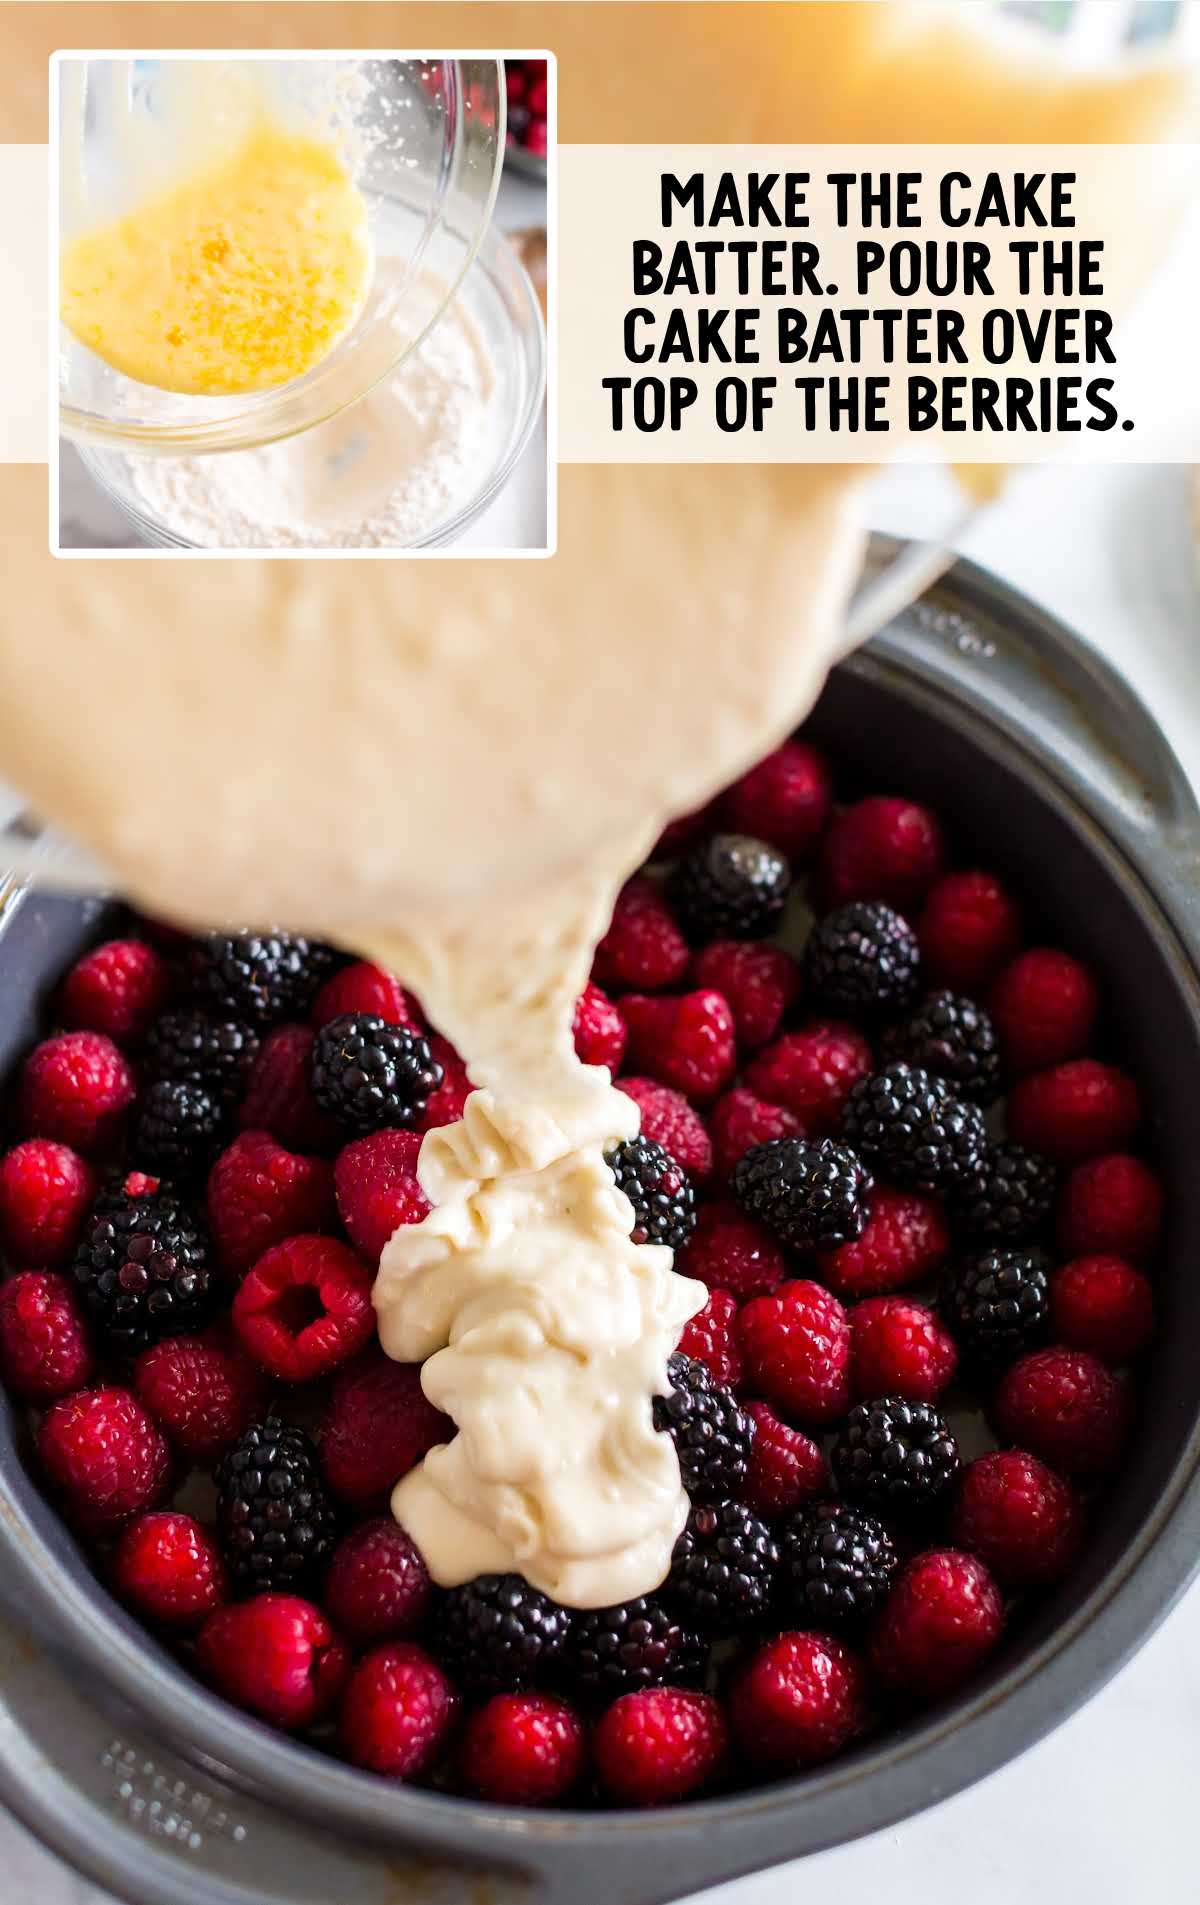 pour the cake batter over the berries in the pot